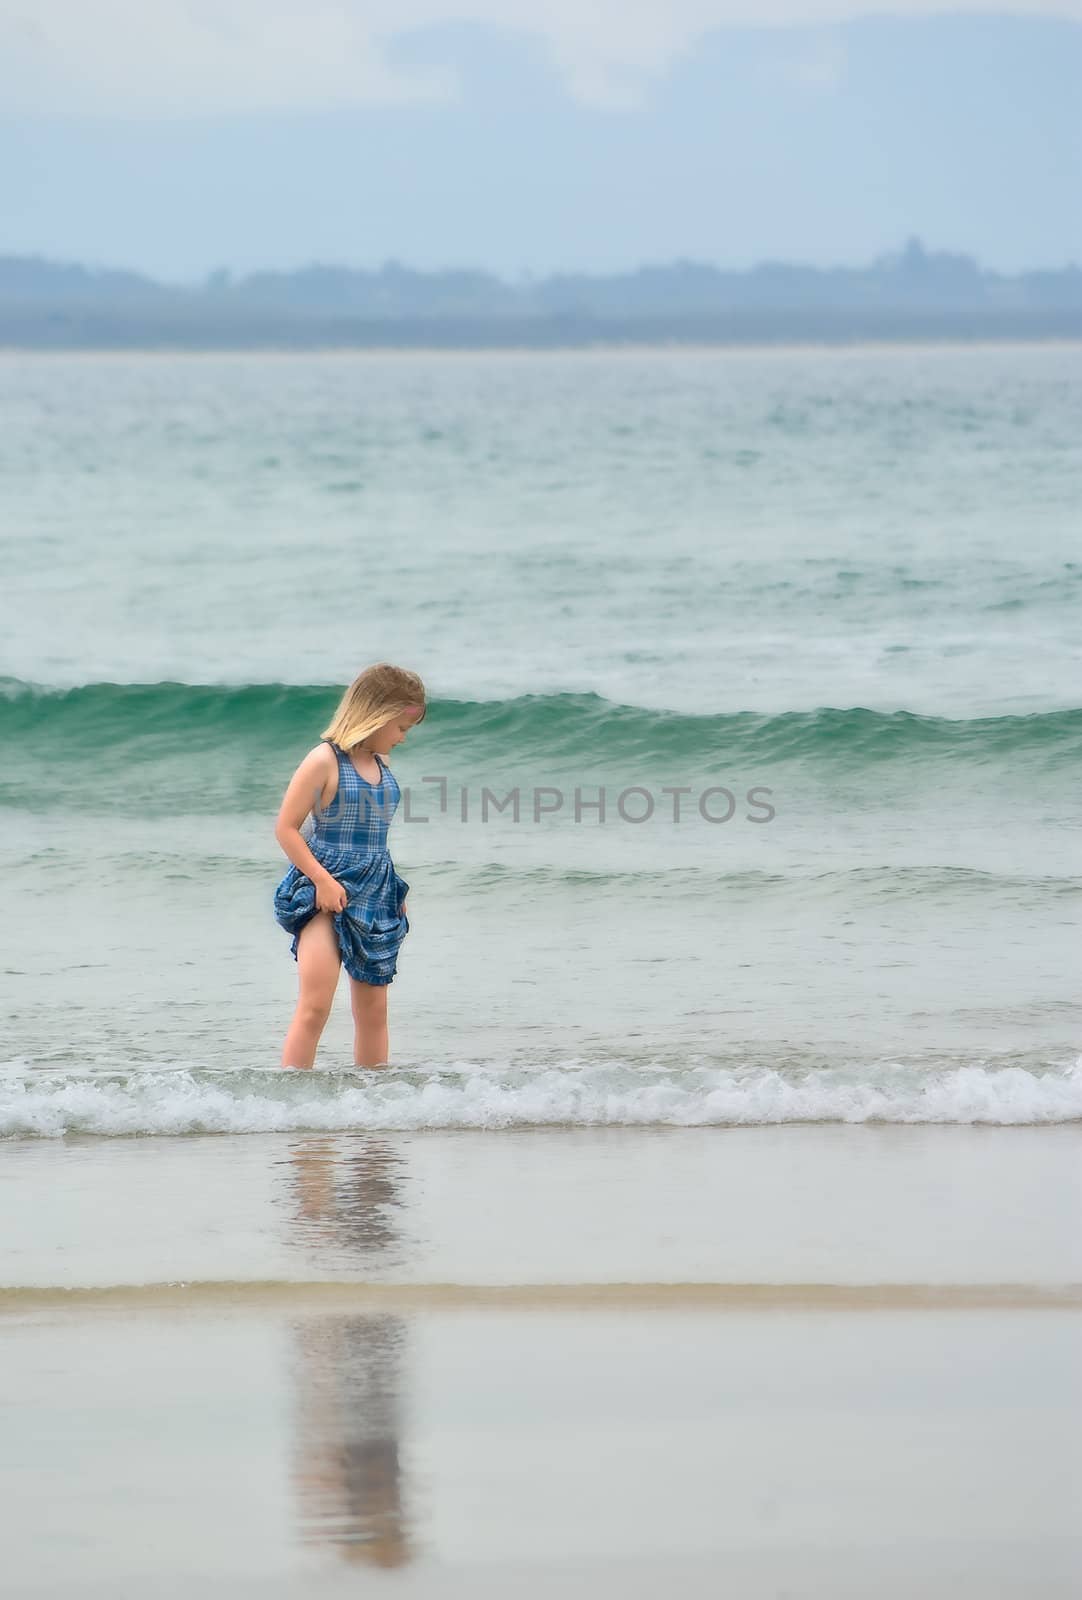 very soft dreamy image of a young girl at the beach